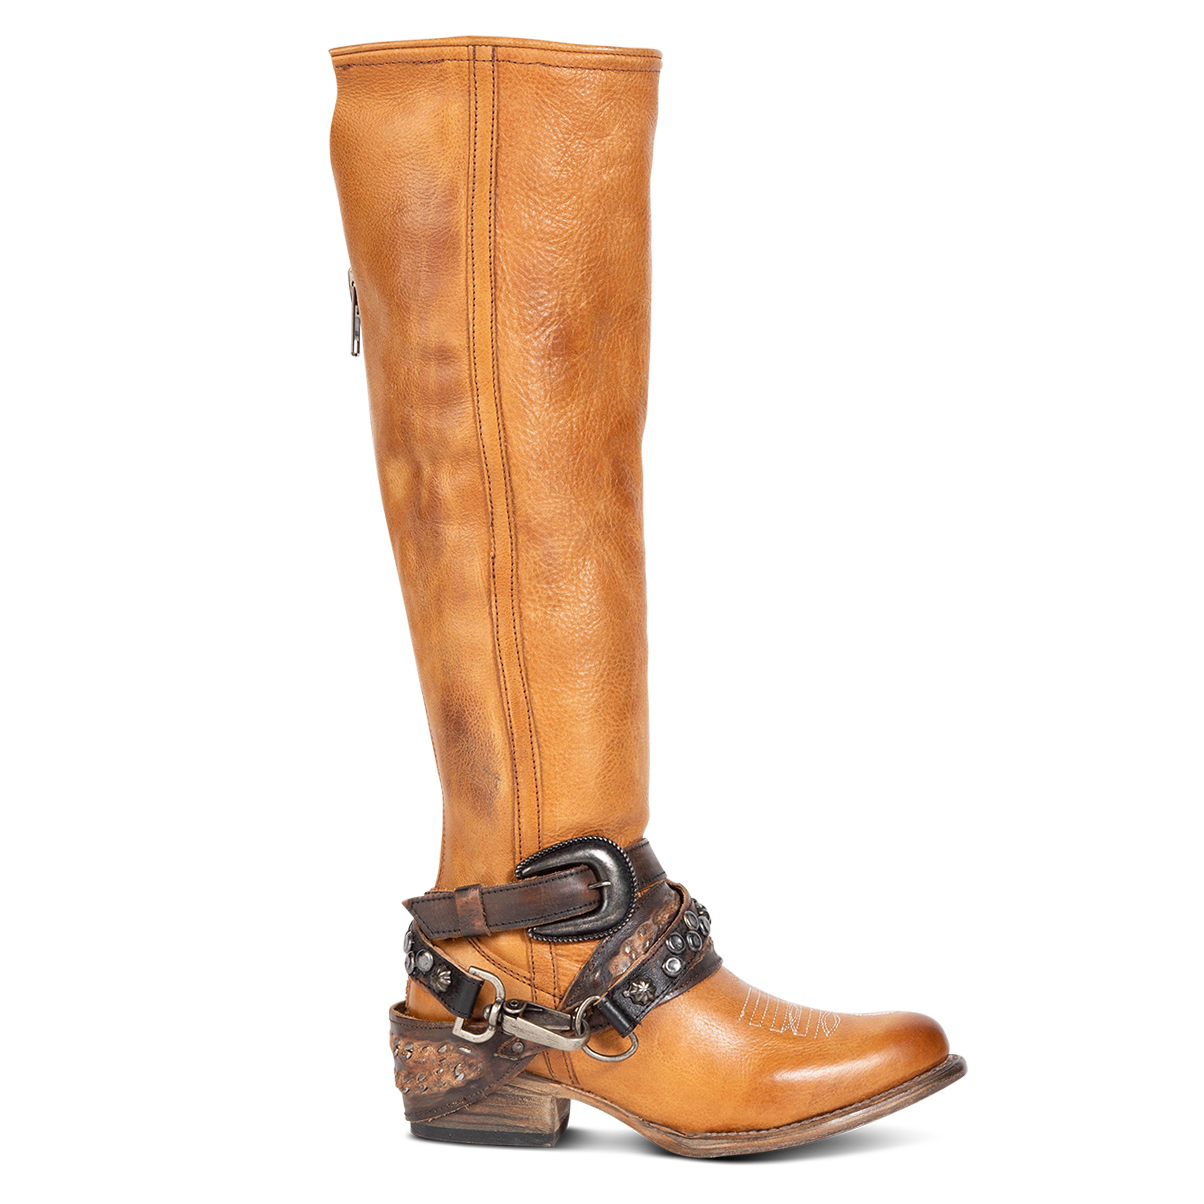 FREEBIRD women's Rodondo wheat boot featuring a a relaxed silhouette, low heel, and mixed metal buckles